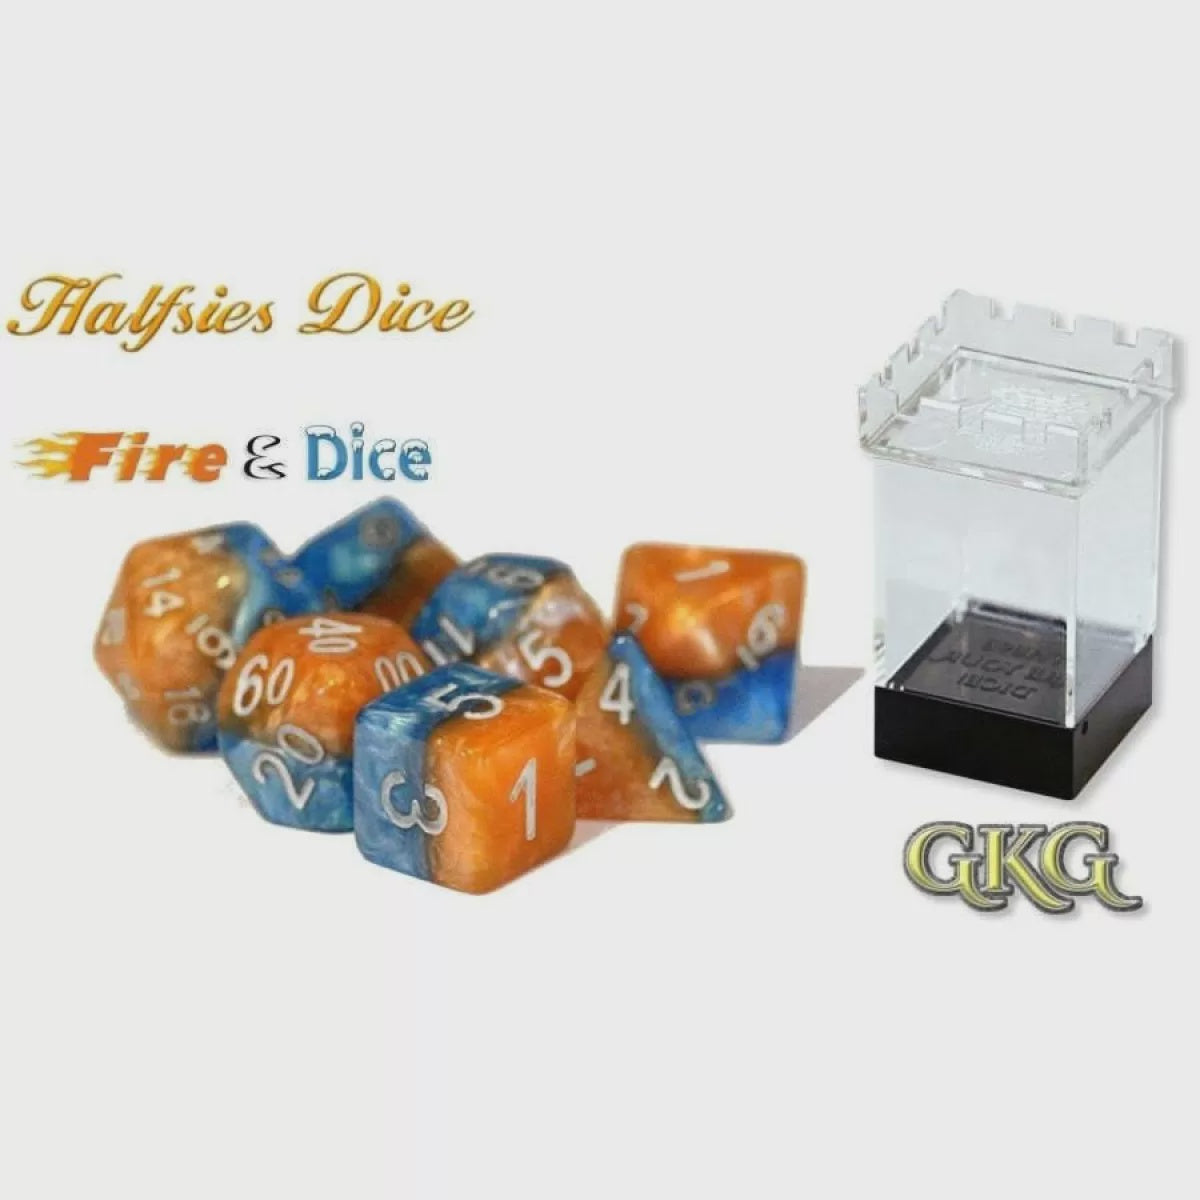 Halfsies Dice Fire &amp; Dice with Upgraded Dice Case